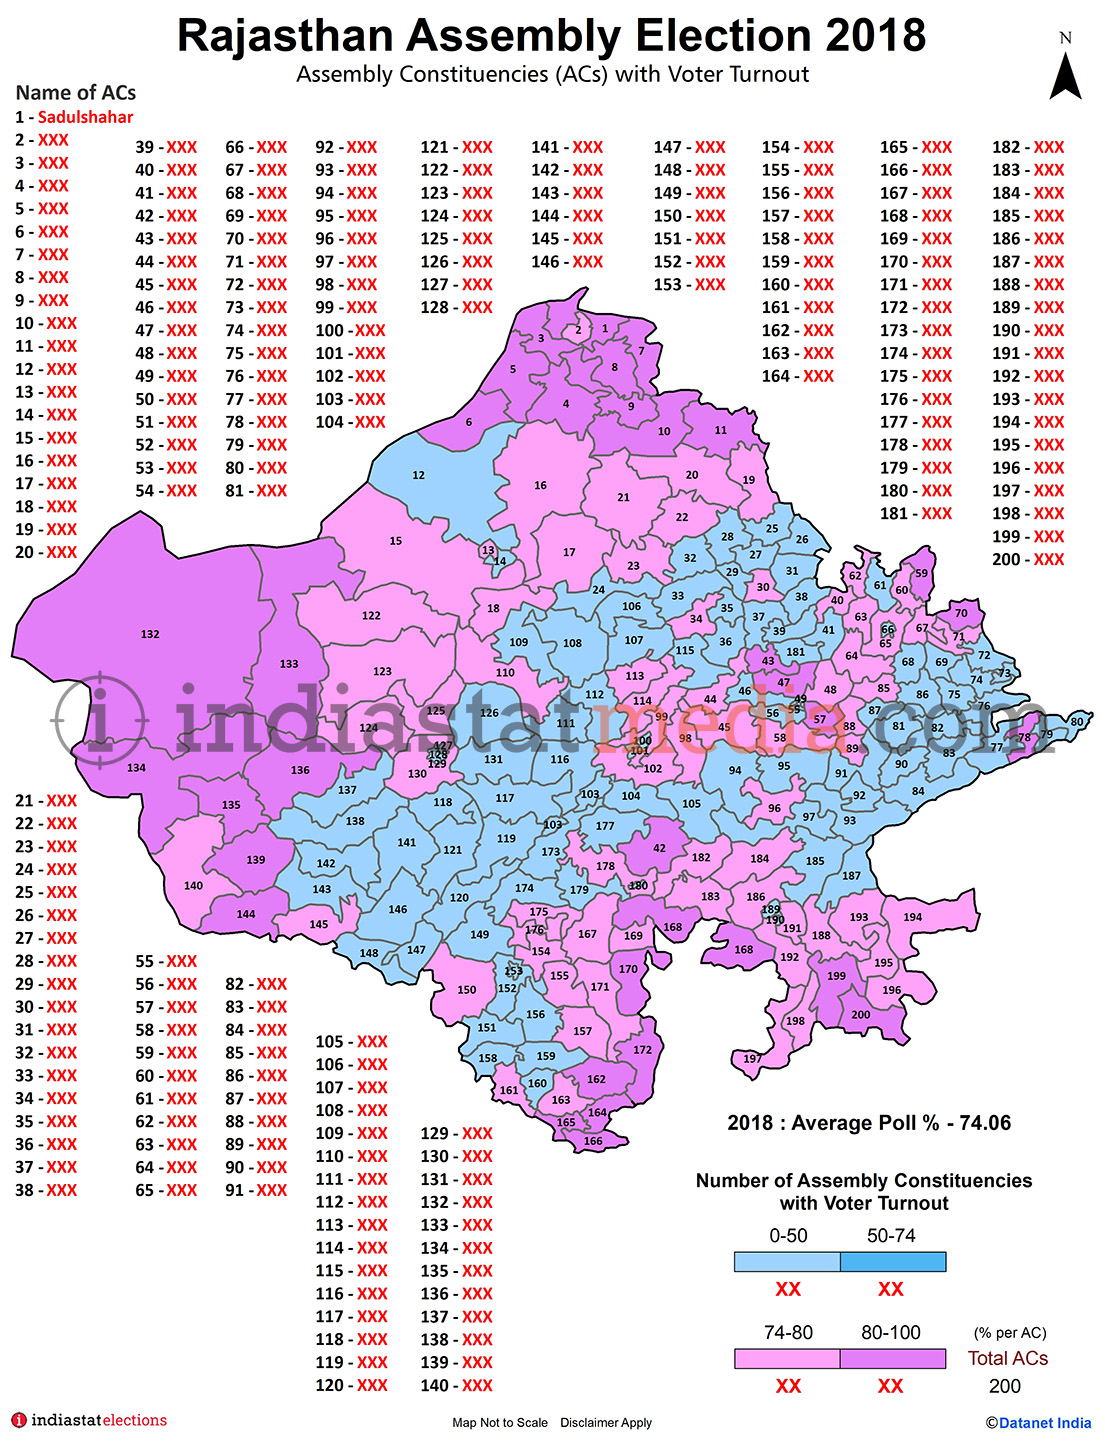 Assembly Constituencies (ACs) with Voter Turnout in Rajasthan (Assembly Election - 2018)